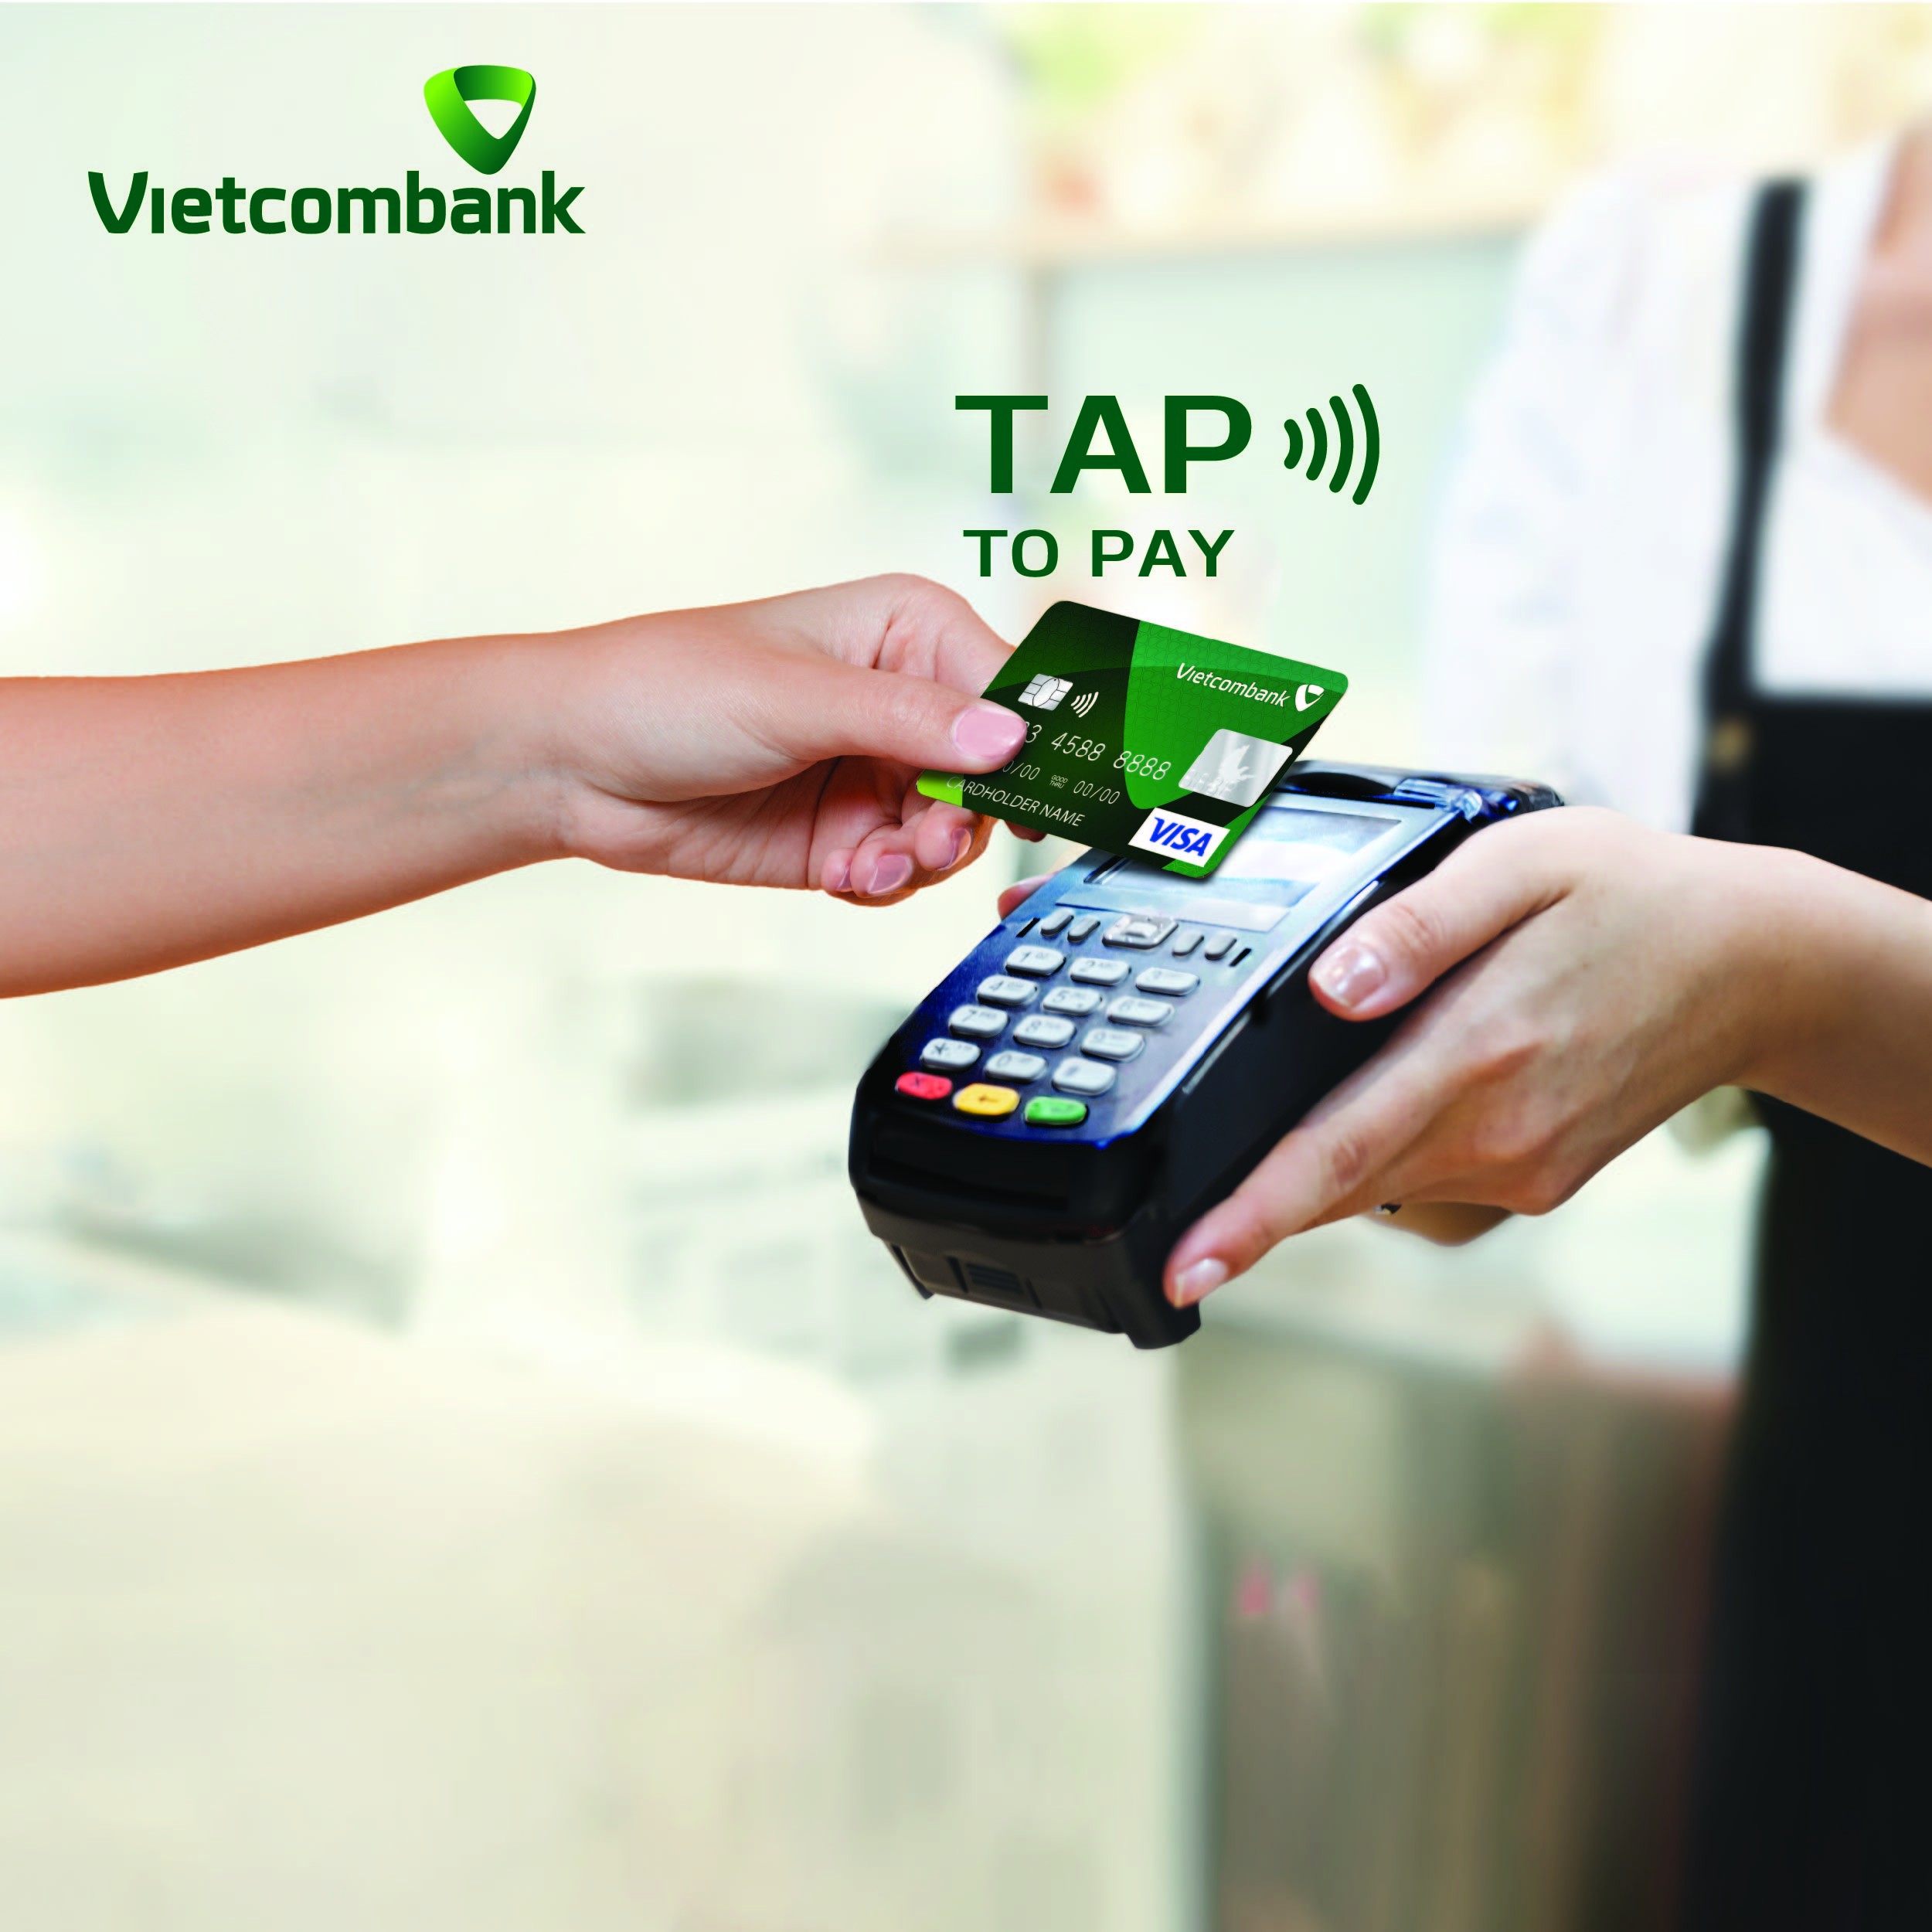 vcb-contactless-1664261615.jpg